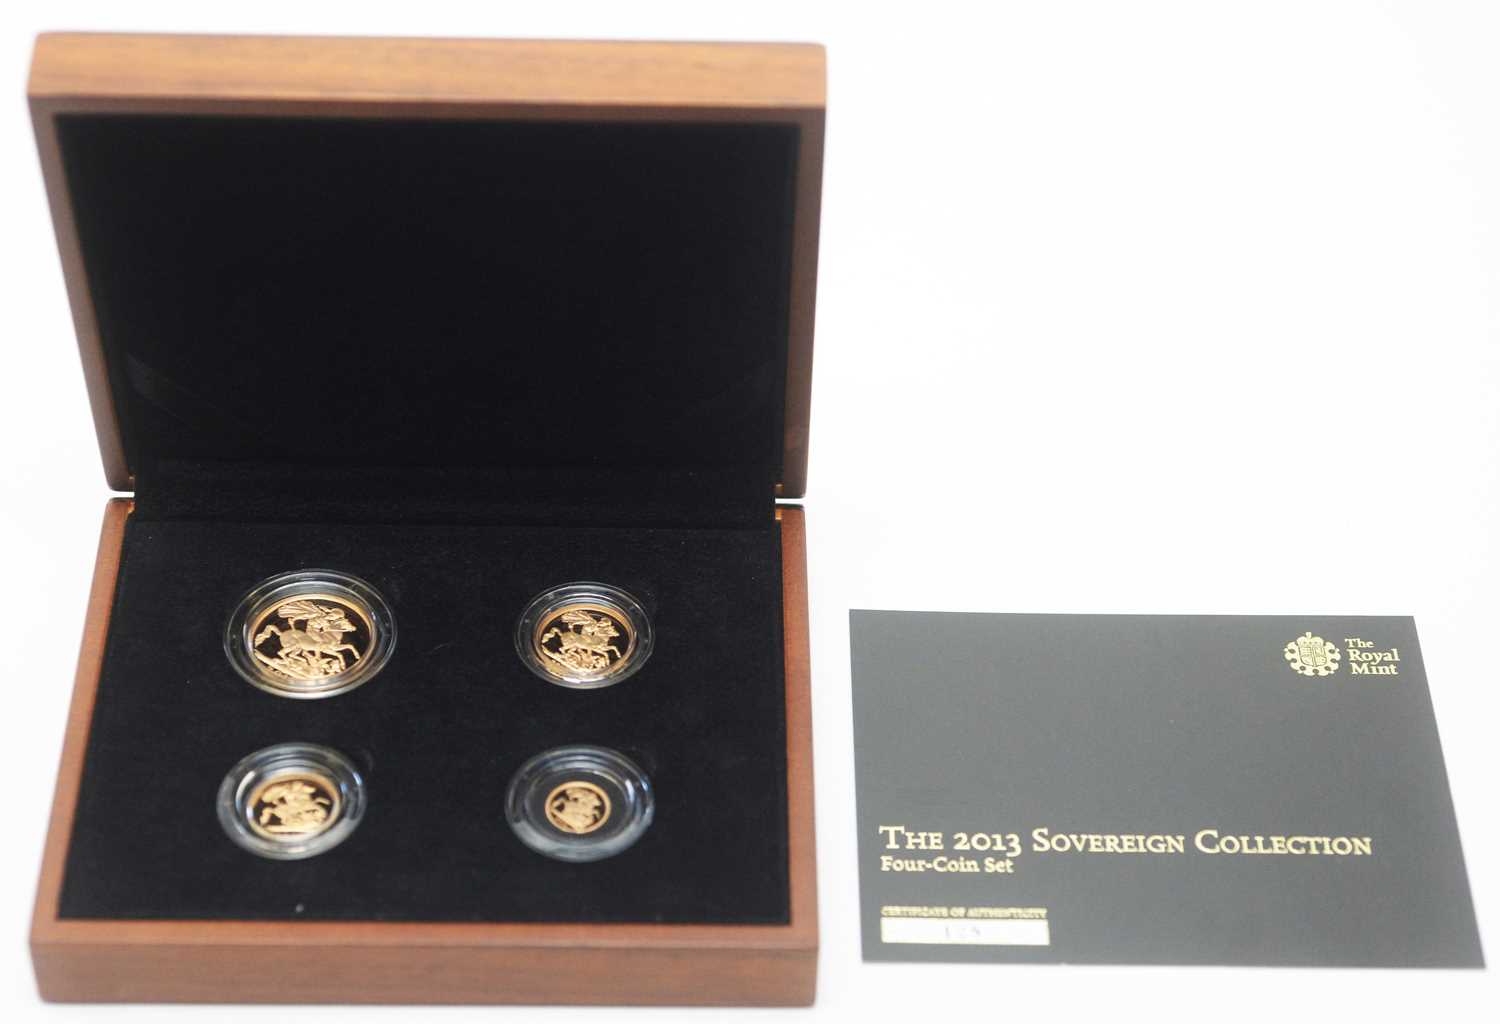 13 - The 2013 Sovereign Collection, issued by The Royal Mint,